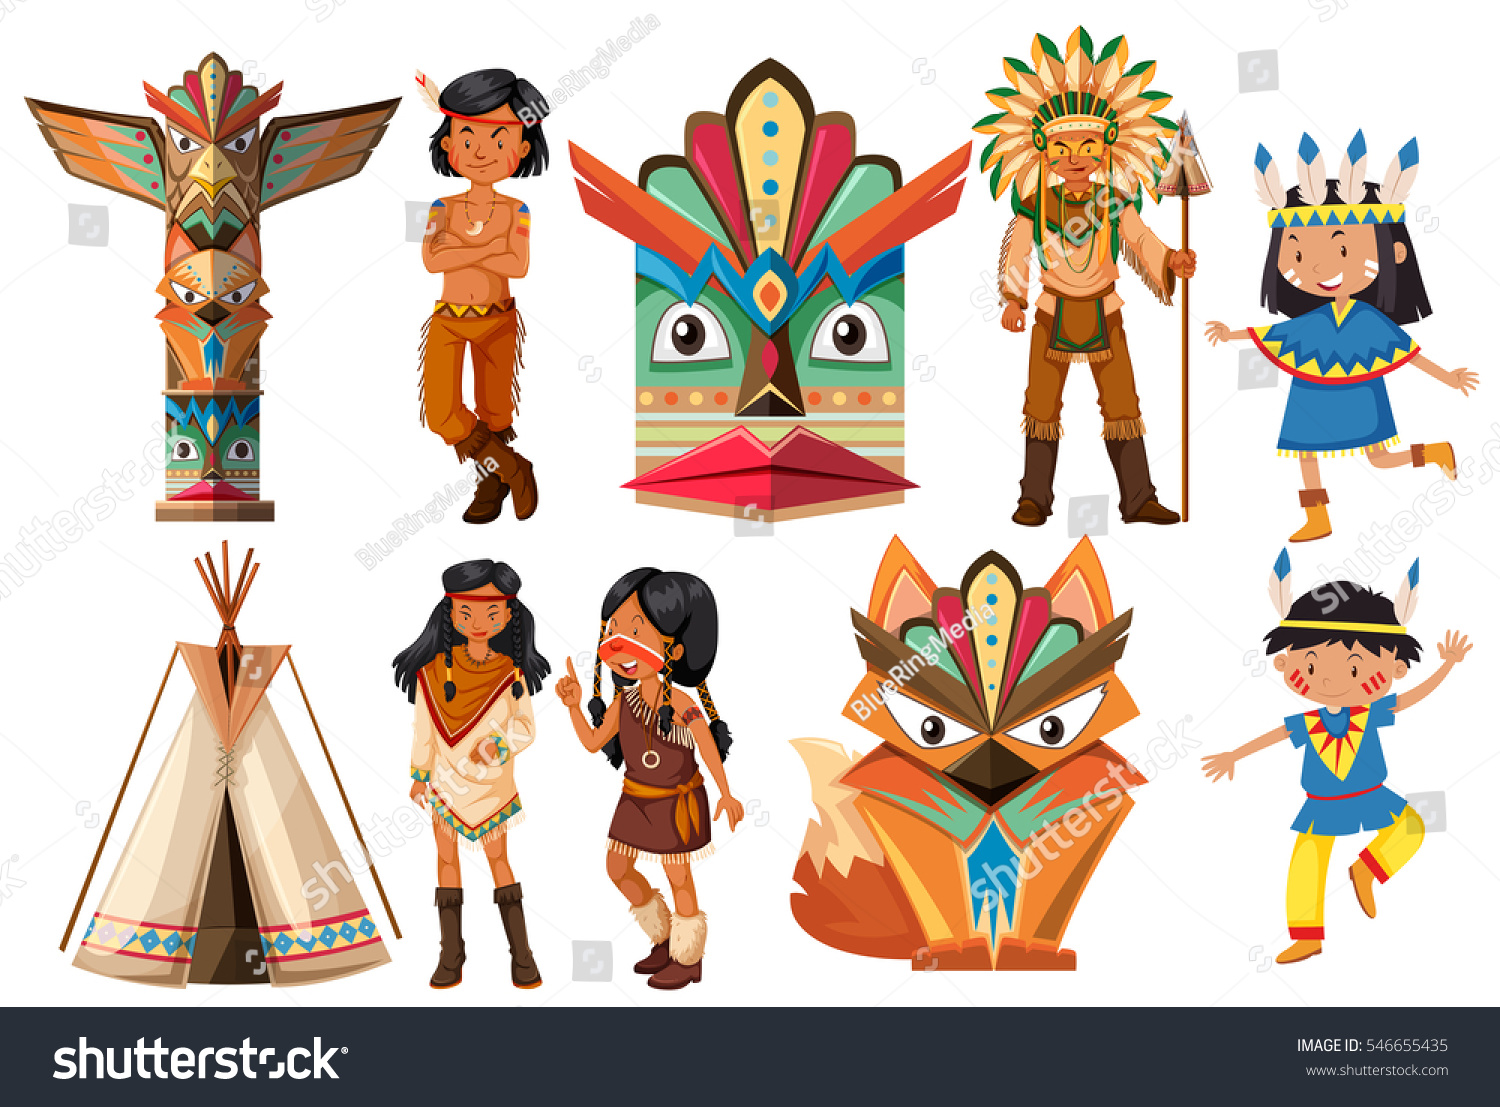 Native american indians and traditional items illustration #546655435